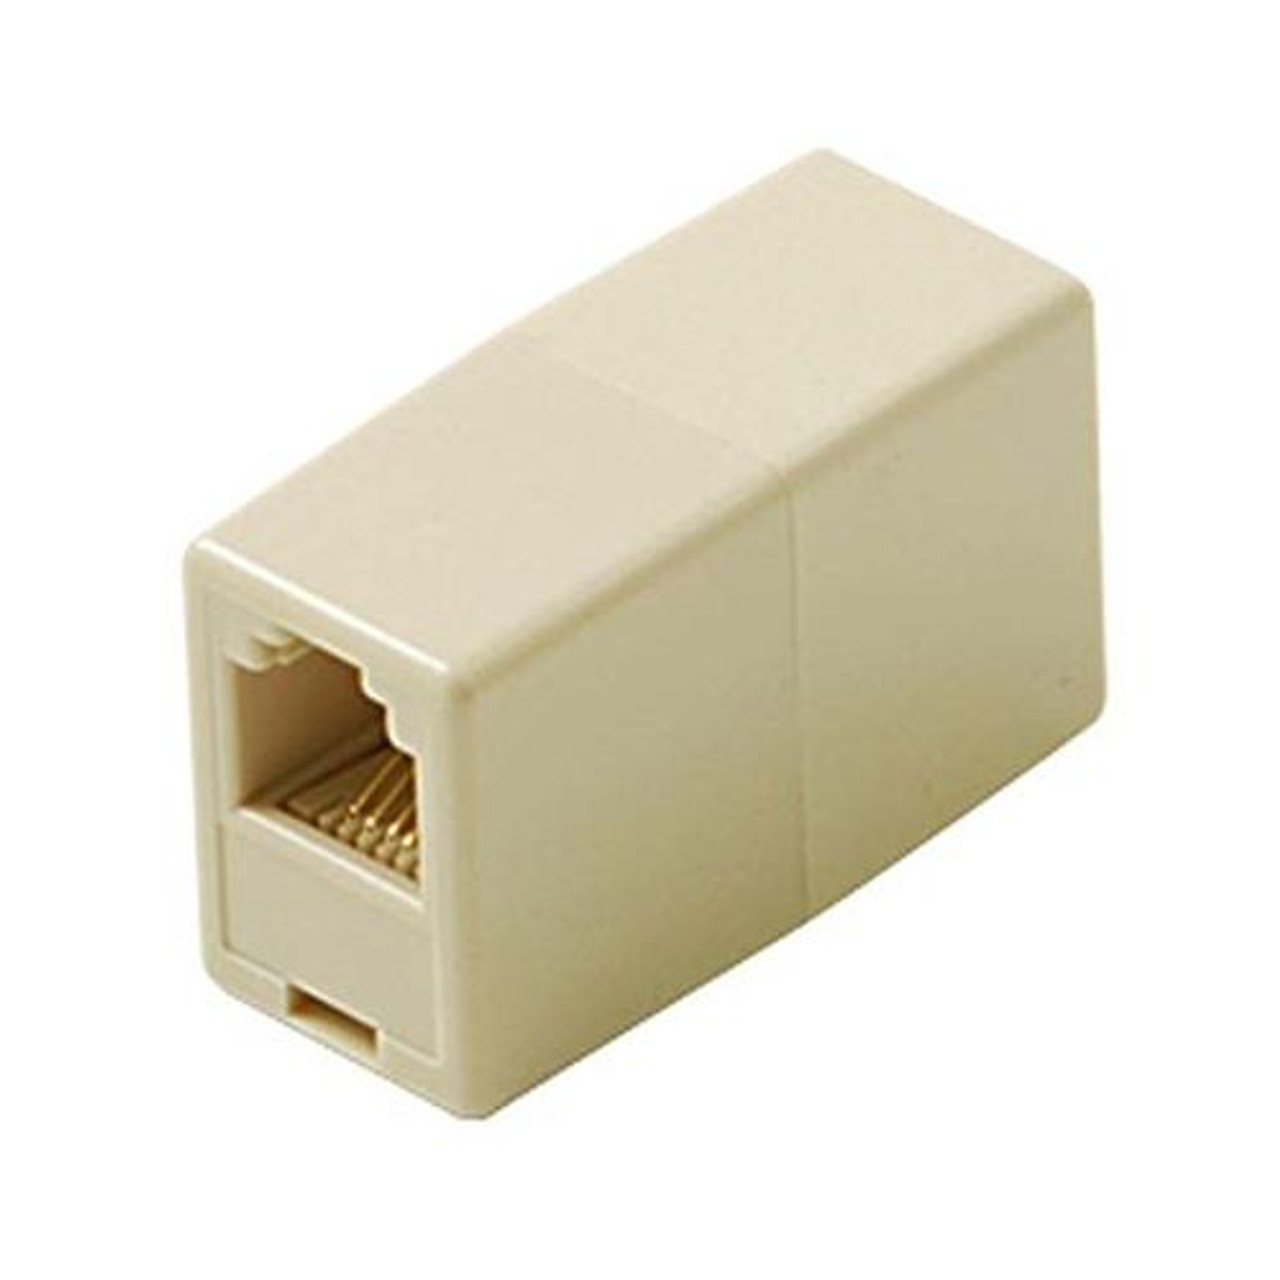 Steren 300-034-IV-10 4-Conductor Coupler Phone Ivory Modular Coupler In-Line Telephone RJ11 Phone Inline Adaptor Cord RJ-11 Jack Plug Extension Add-On Cable Splice Connection, 10 Pack, Part # 300034-IV-10